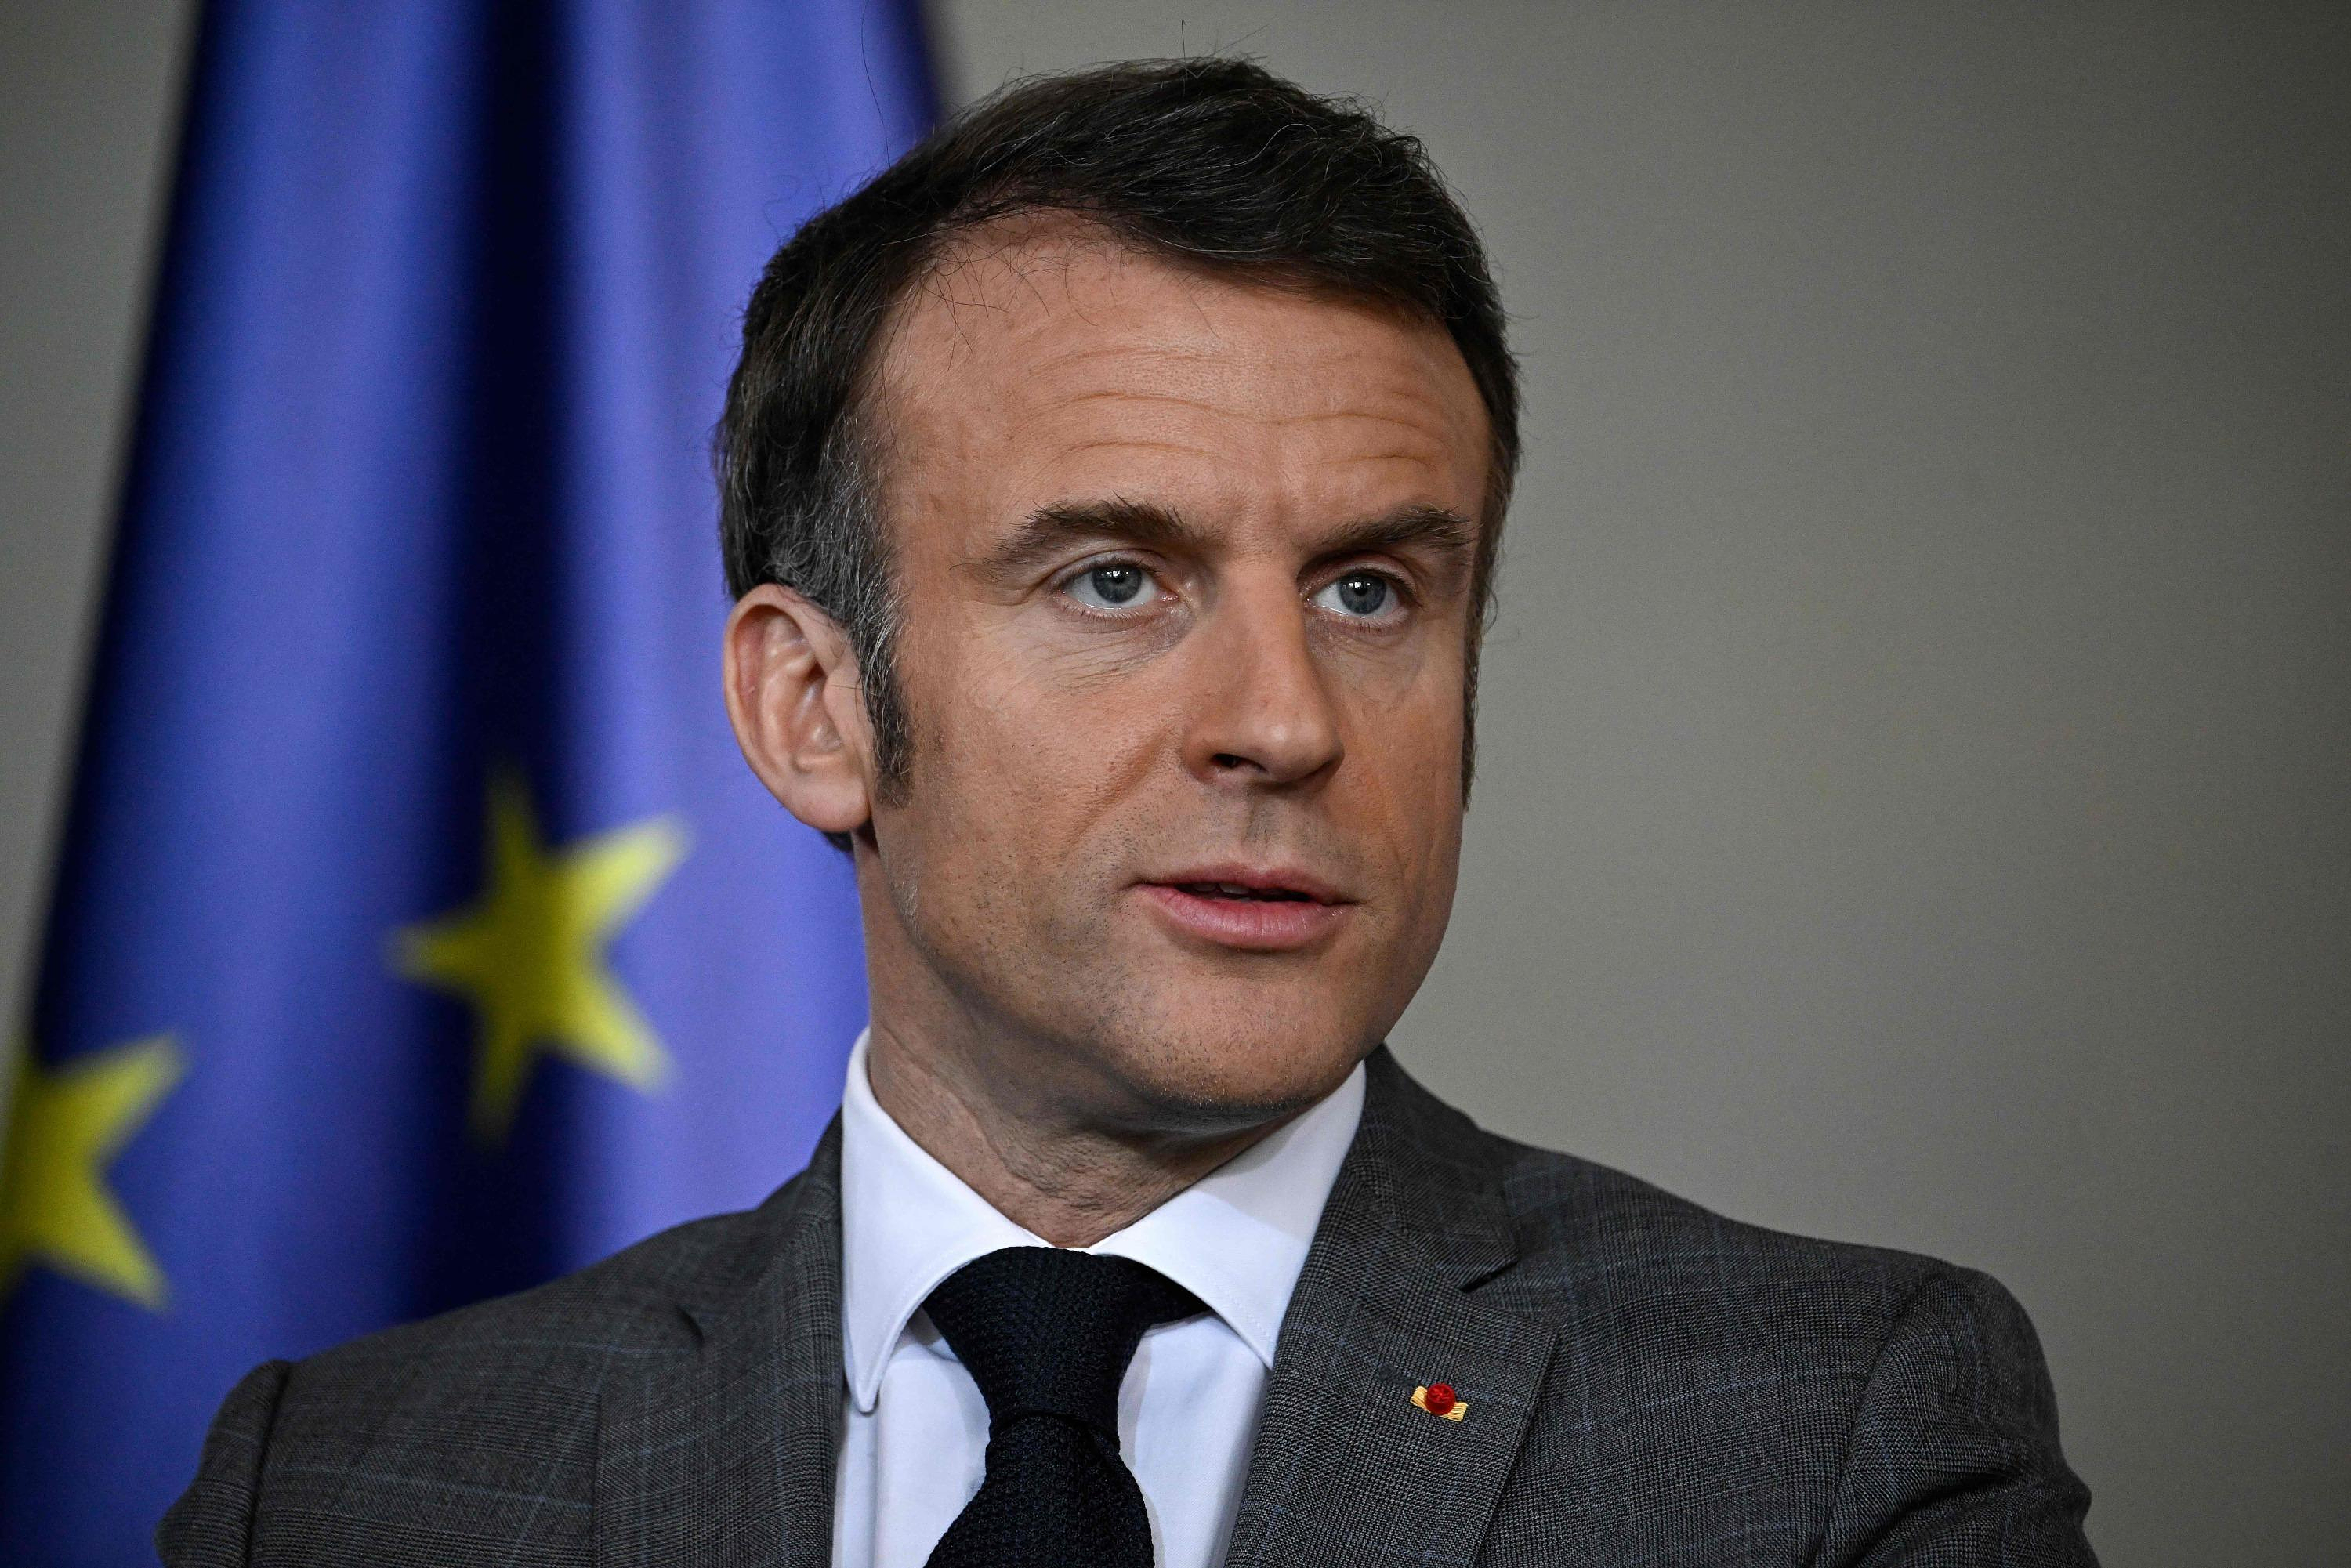 War in Ukraine: “Perhaps at some point, we will have to have operations on the ground”, reaffirms Macron